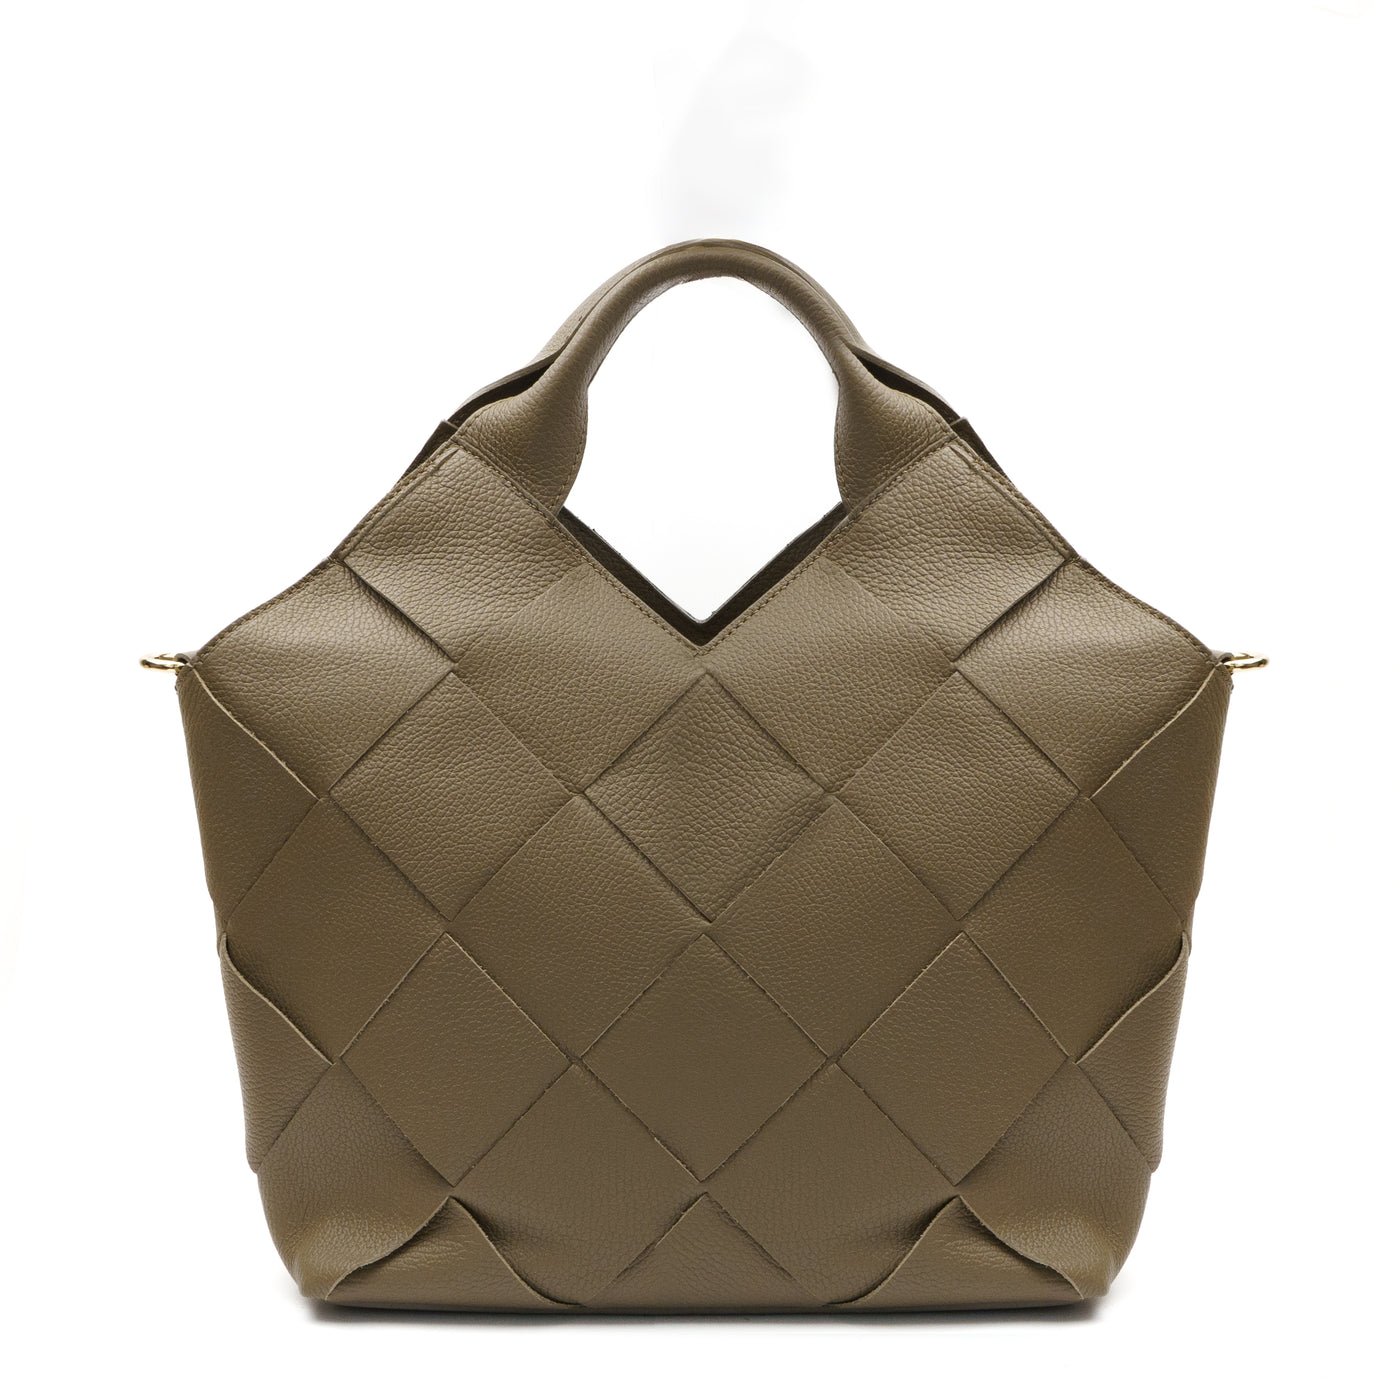 Braided leather bag "Anna", Taupe